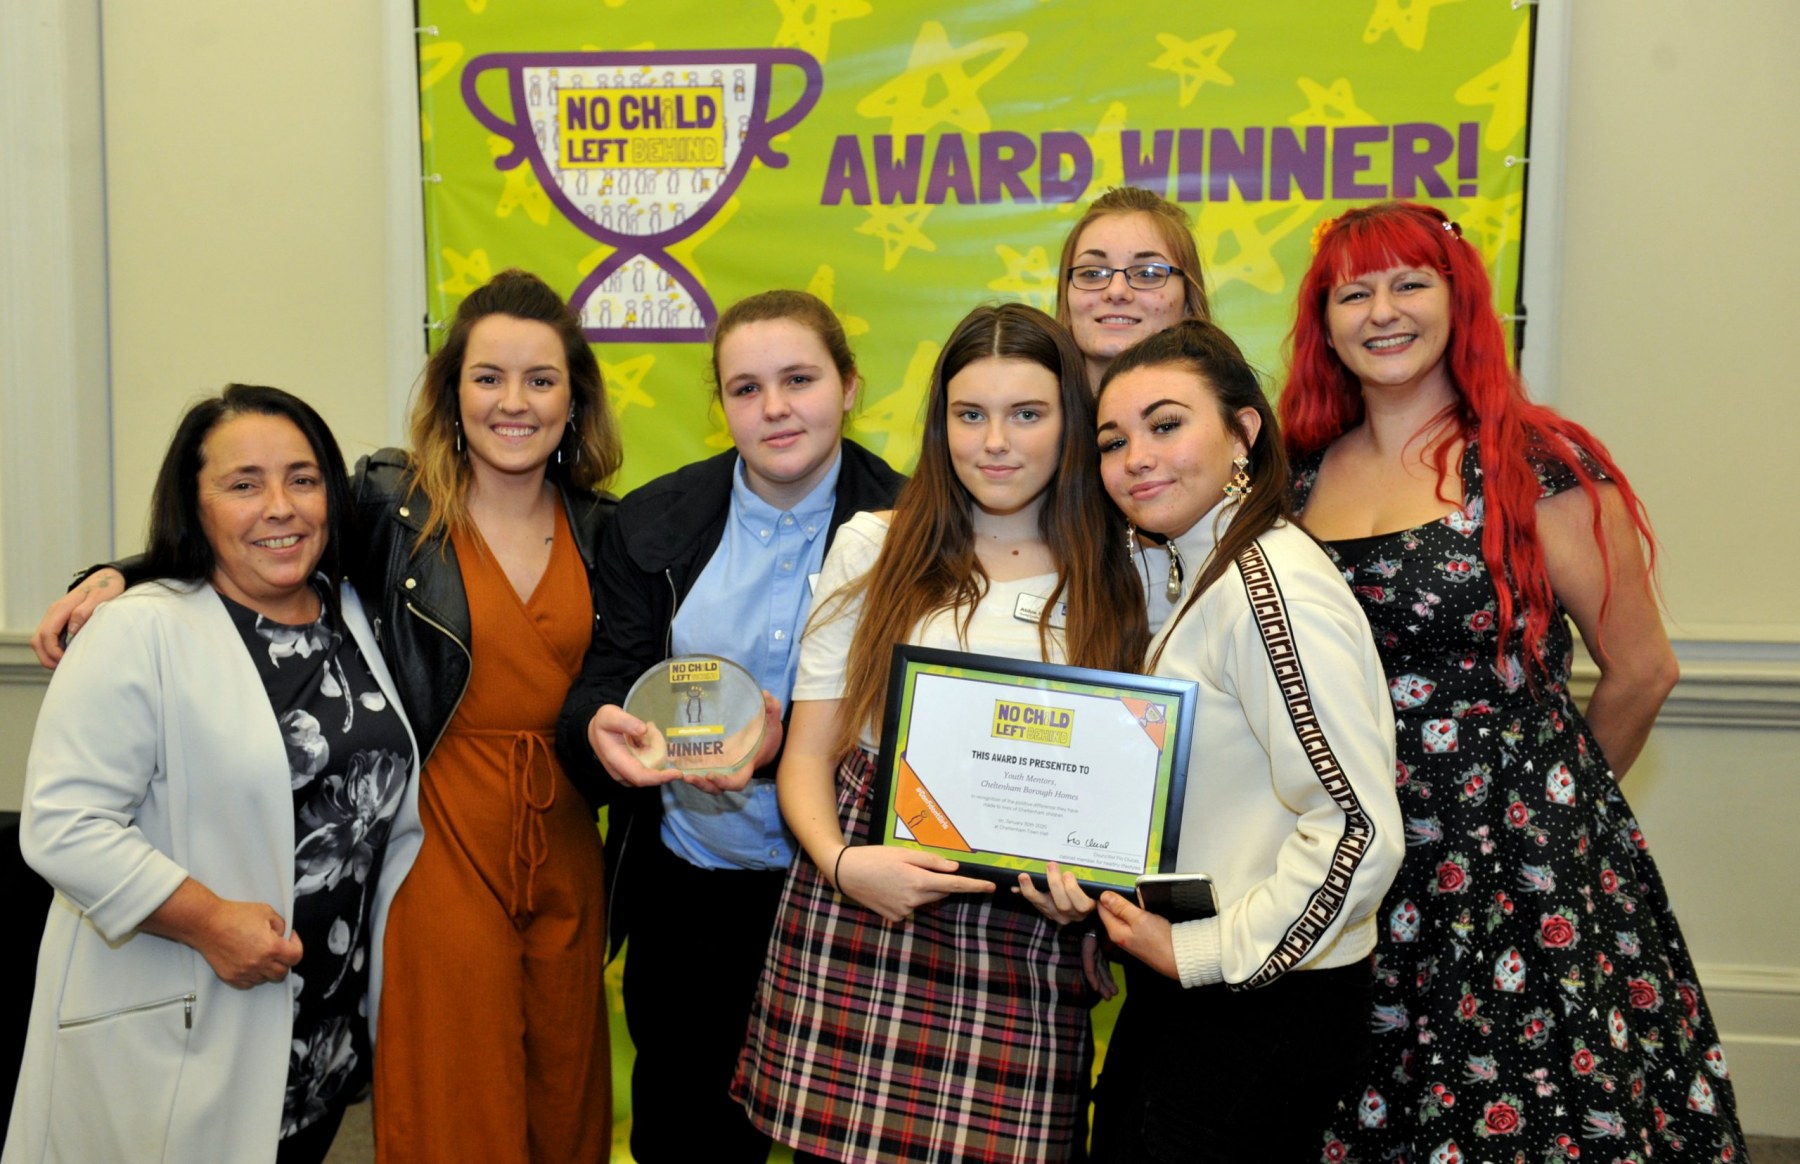 No Child Left Behind awards ceremony at Cheltenham Town Hall. Confident Girls Award presented by Councillor Flo Clucas and Tim Atkins (CBC) to youth Mentors, Cheltenham Borough Homes